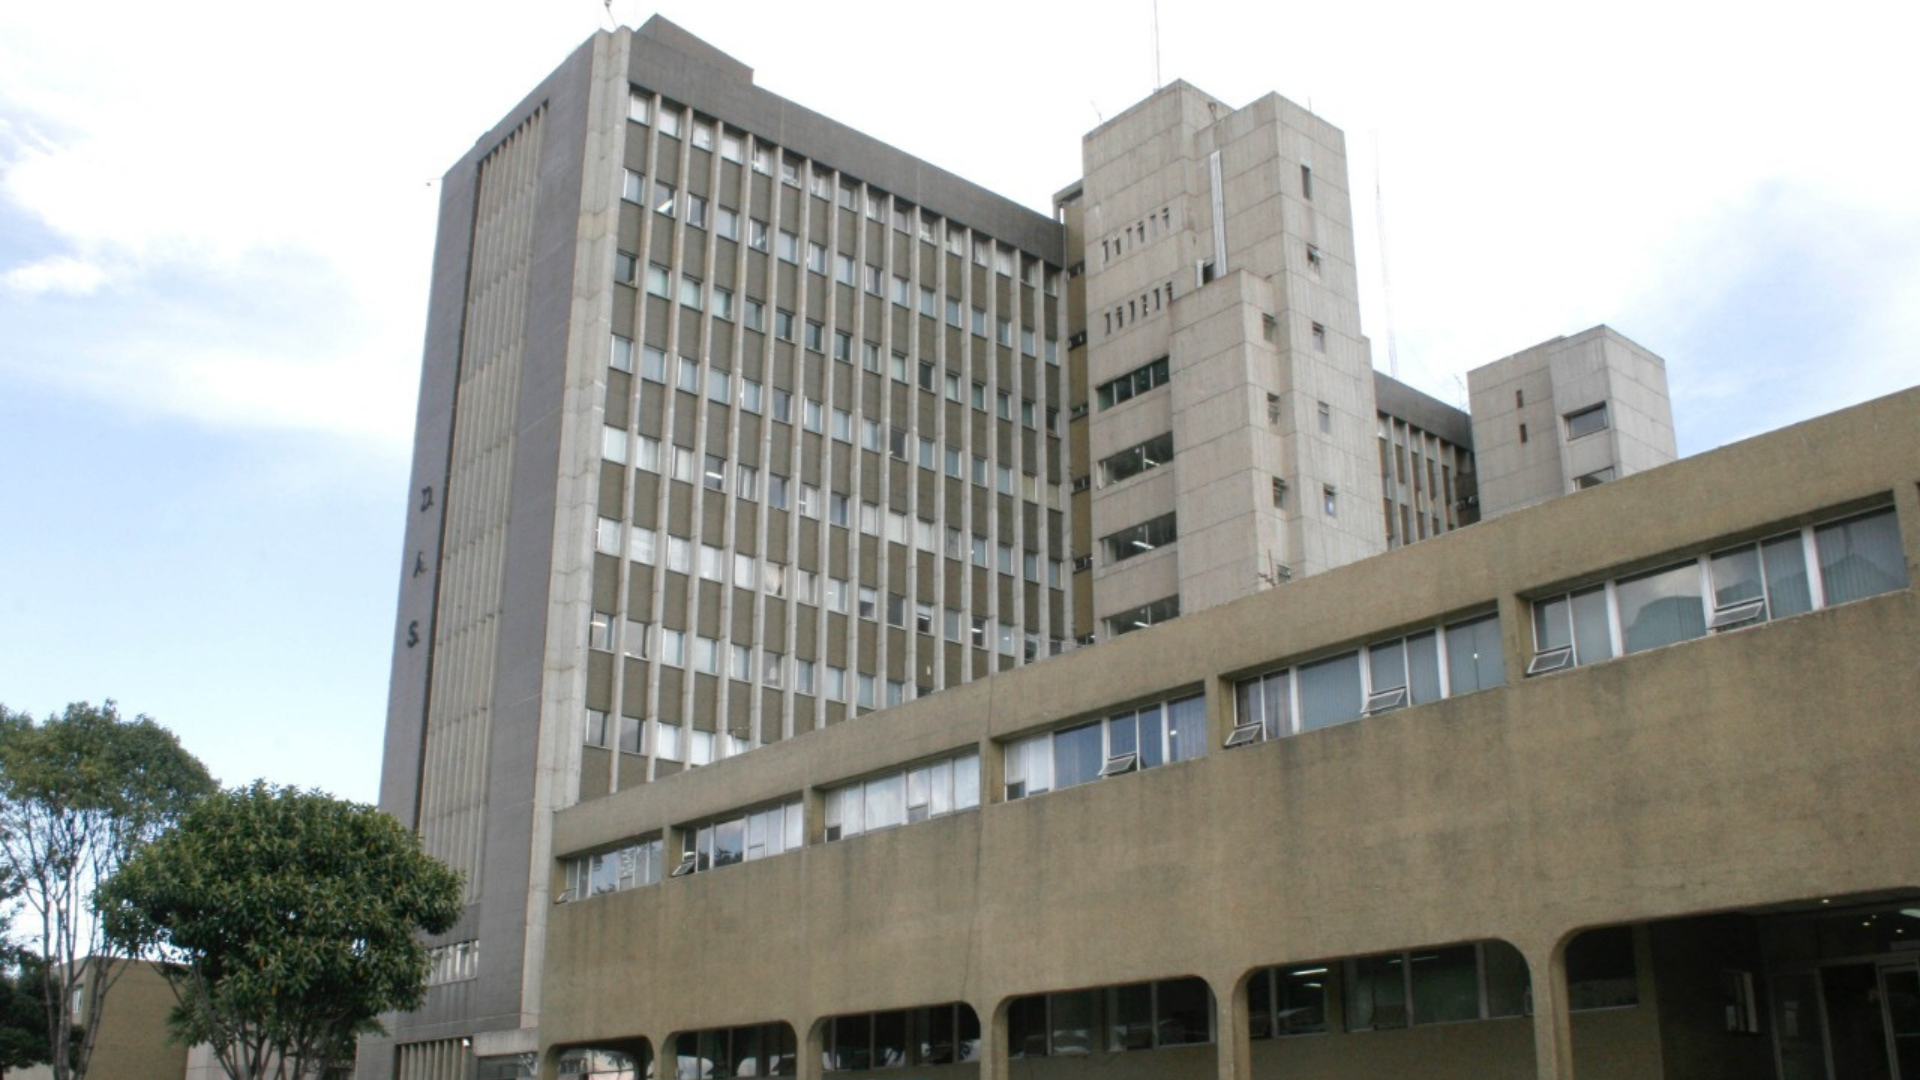 Archive image of the DAS façade.  A former DAS official now leads an investigation against her former bosses.  (Colpress)